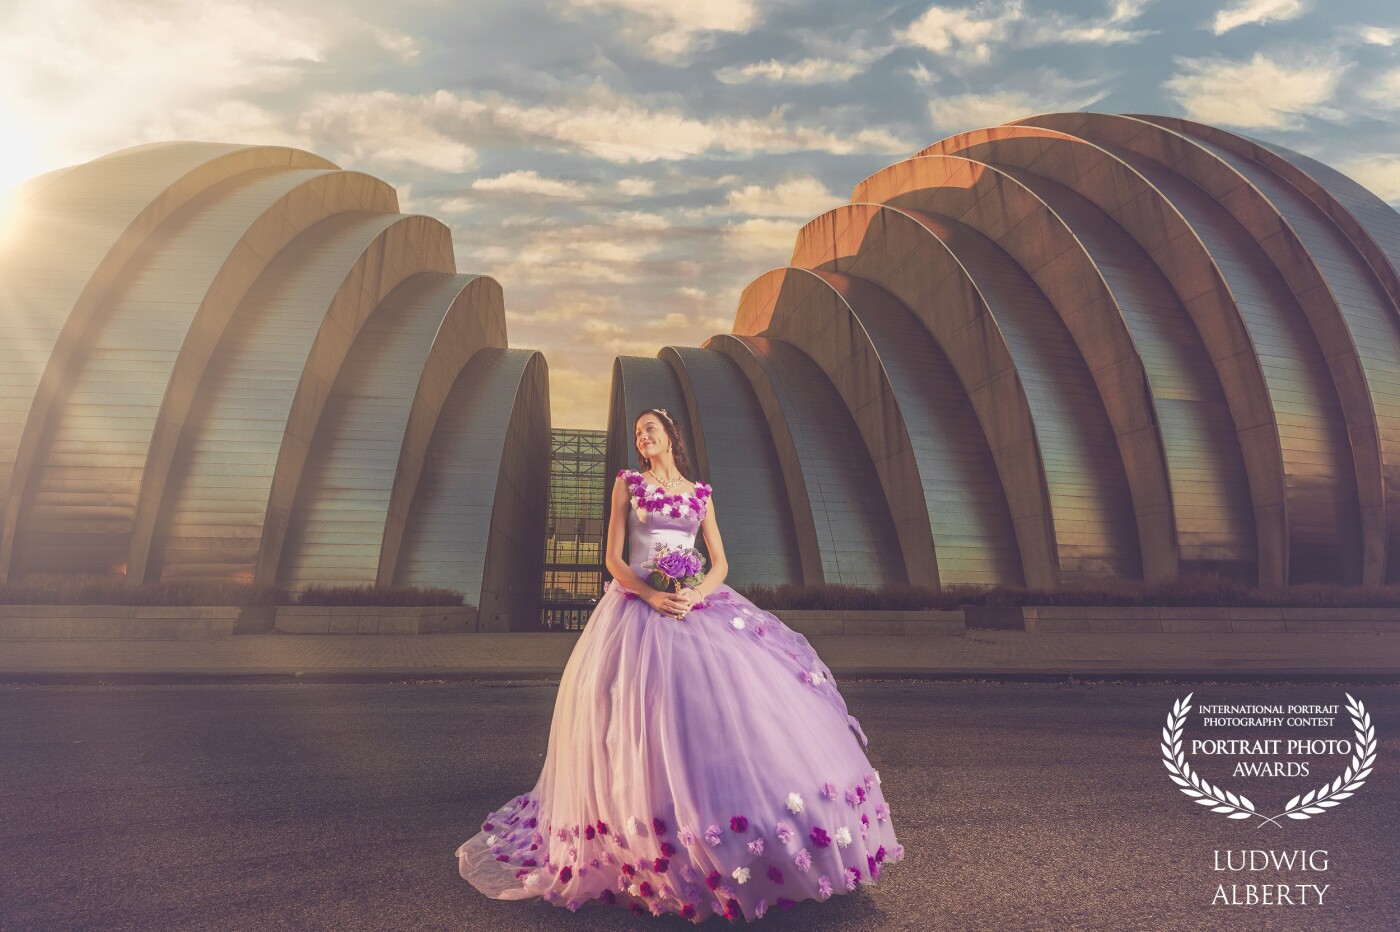 This is a quinceañera photoshoot, quinceañera is the sweet sixteen in Latin America, we chose the Kauffman center for the performing arts as a background because of the impressive architecture of the building. We went early in the morning for 2 reasons, 1. To avoid crowds and 2. Take advantage of the golden hour. I think the beautiful dress is a perfect contrast with the background. Love how the photo came out and the opportunity that Mother Nature gave me that day for this photo.